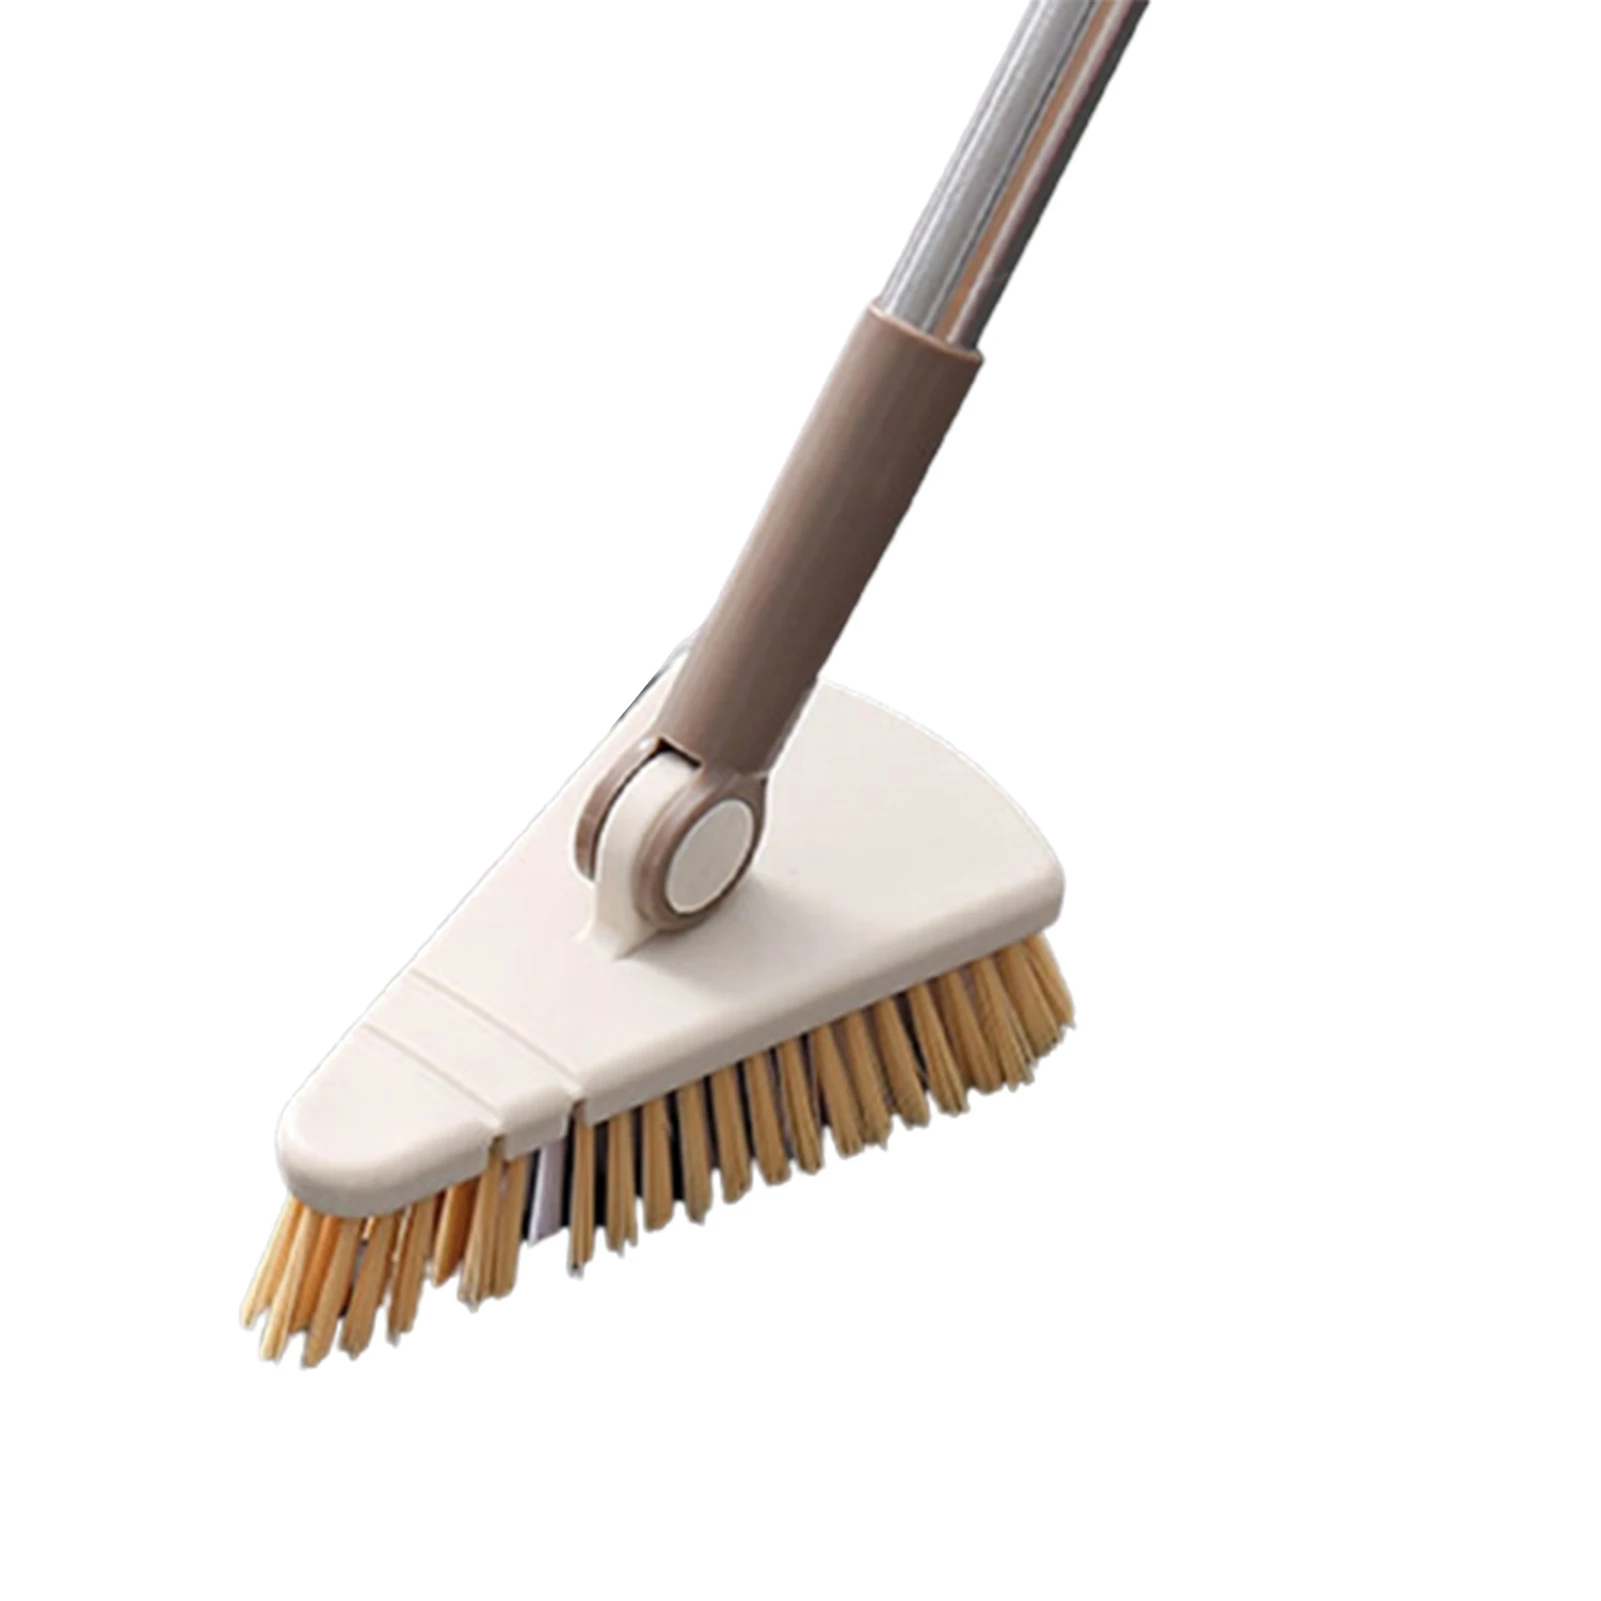 Tile Floor Scrub Brush Triangular & Bendable Design Stiff Bristle Grout and Corner Scrubber Household Cleaning Supply TS1 automatic commercial cleaning robots best	